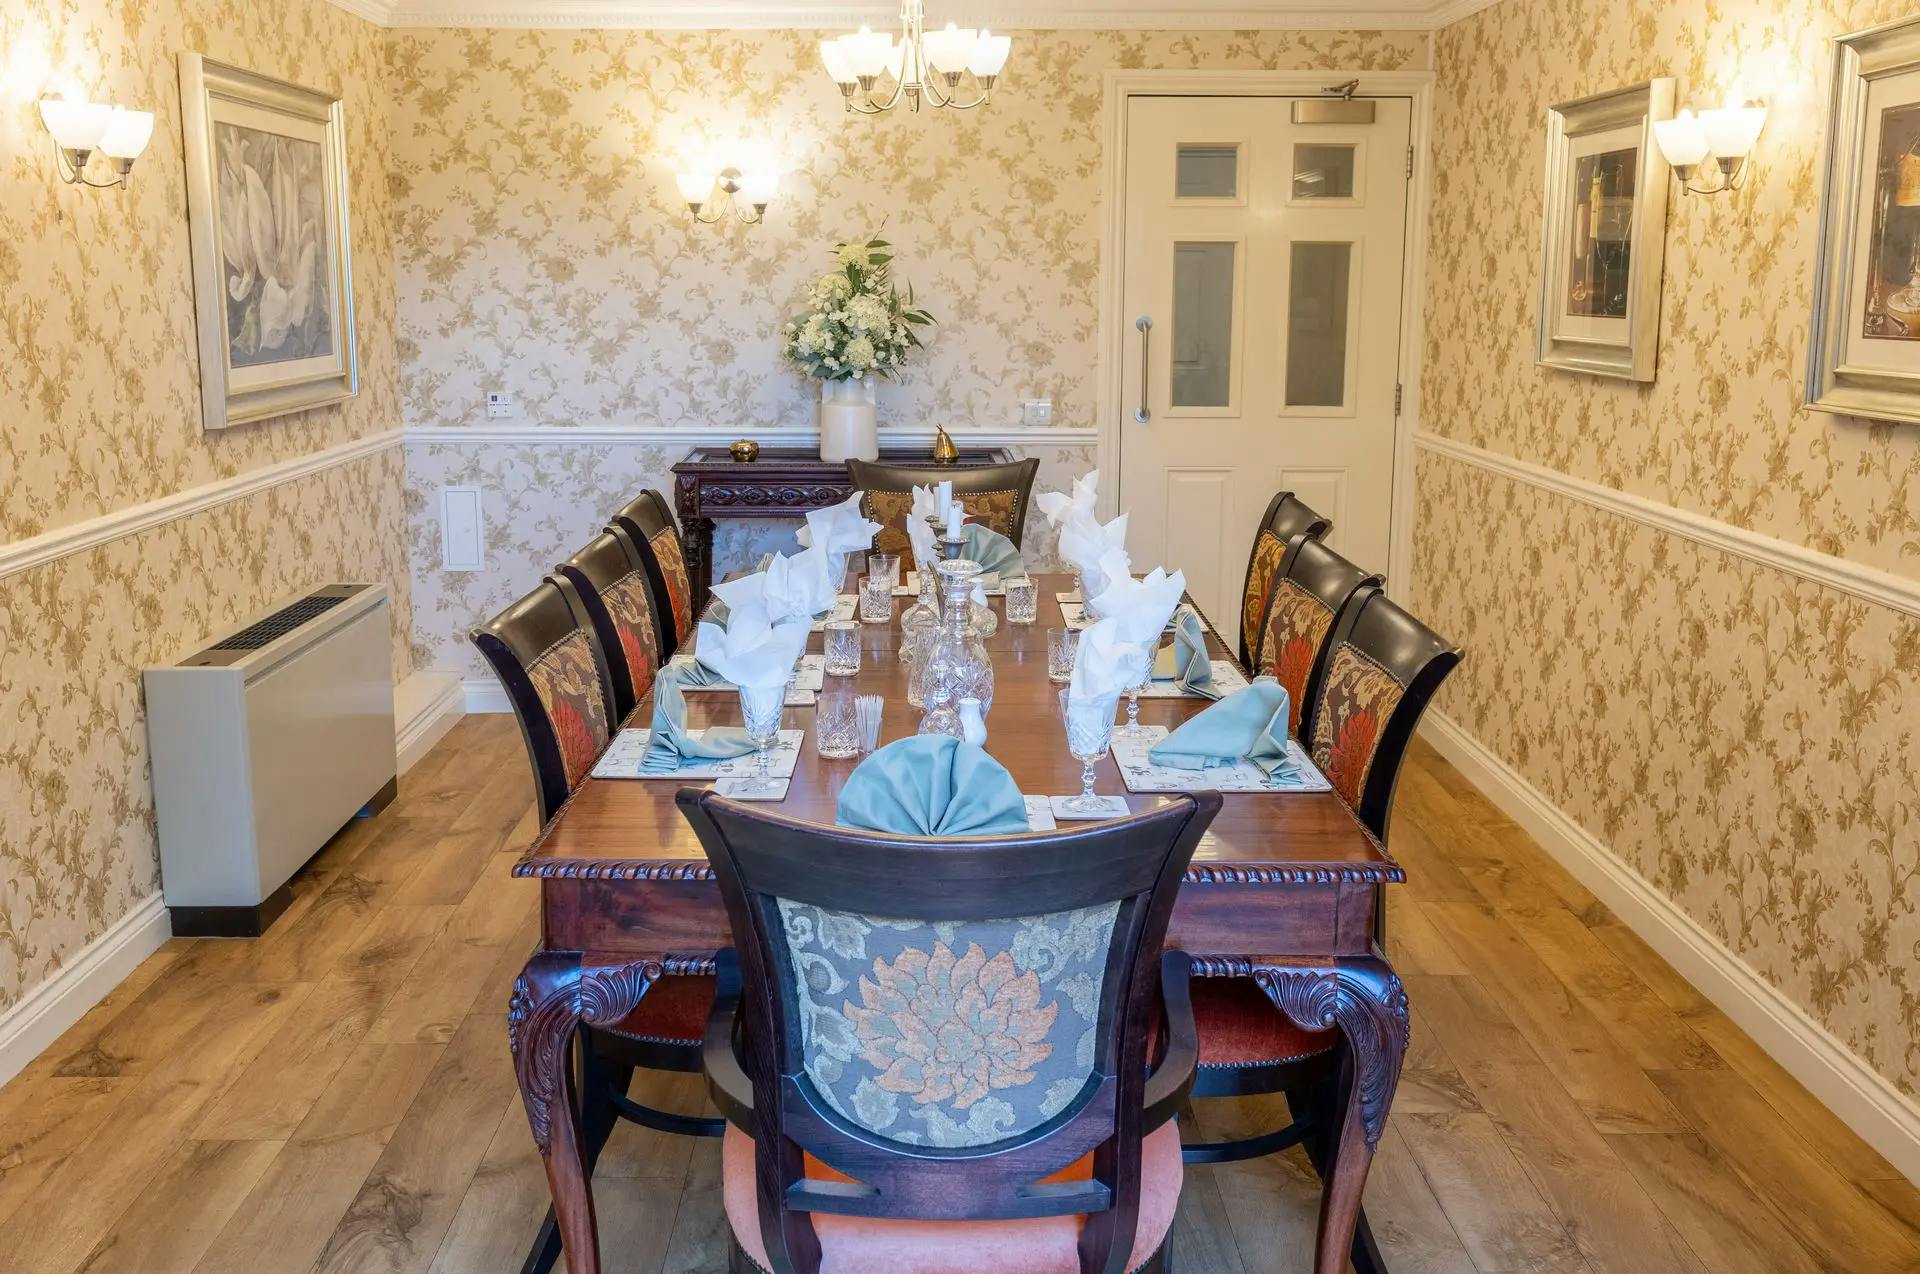 Private Dining Room at Abbeycrest Care Home in Reading, Berkshire